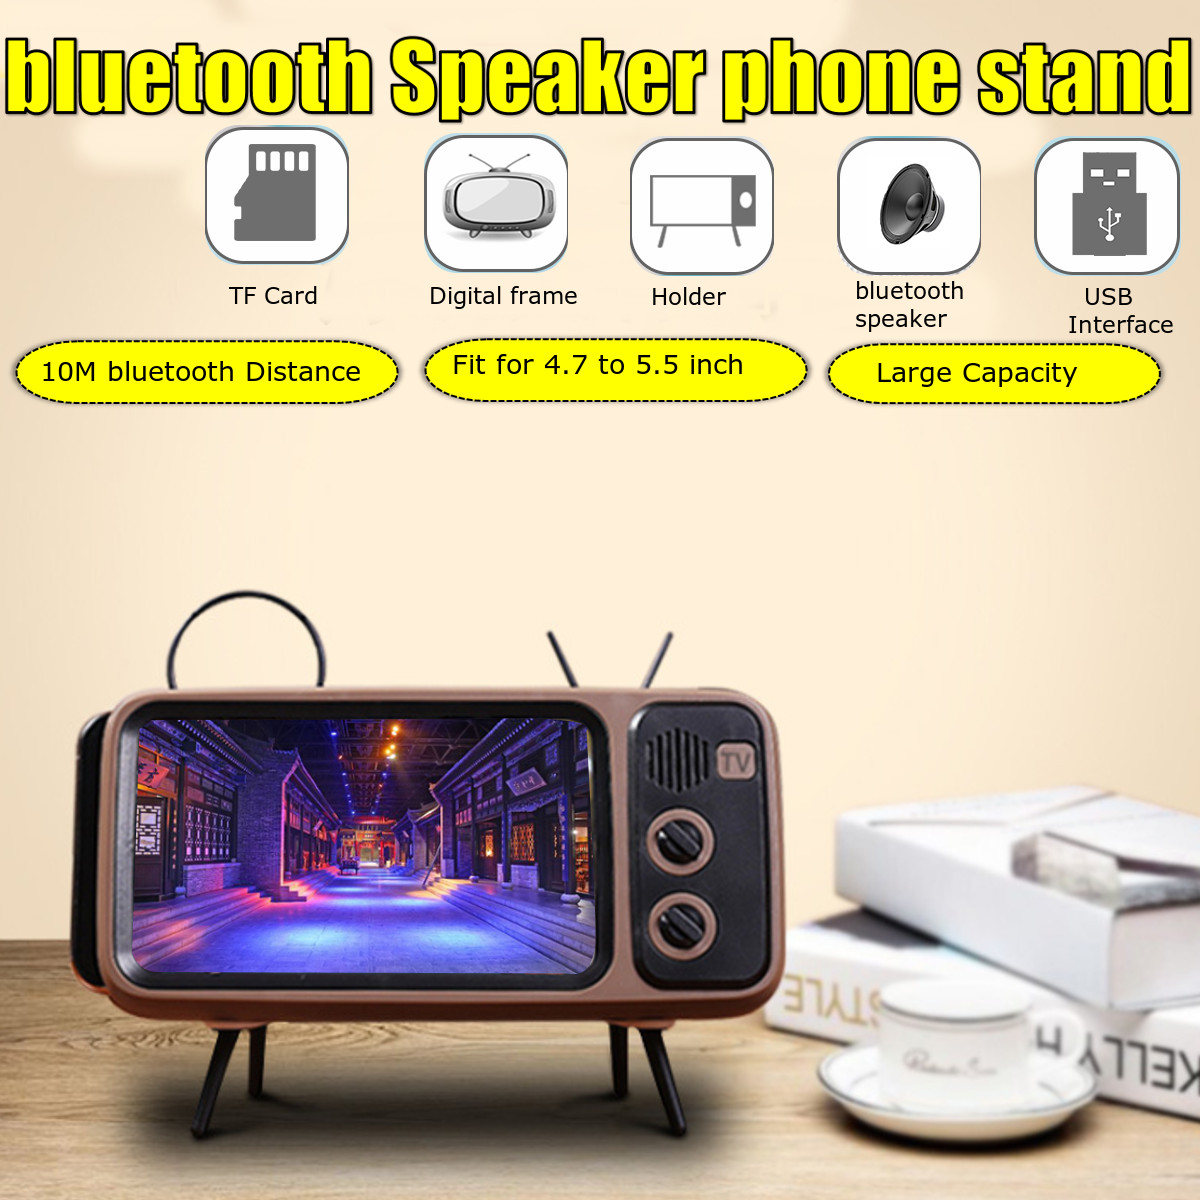 Bakeey Mini Retro TV Pattern bluetooth Speaker Desktop Cell Phone Stand Holder Lazy Bracket for Mobile Phone between 4.7 inch to 5.5 inch